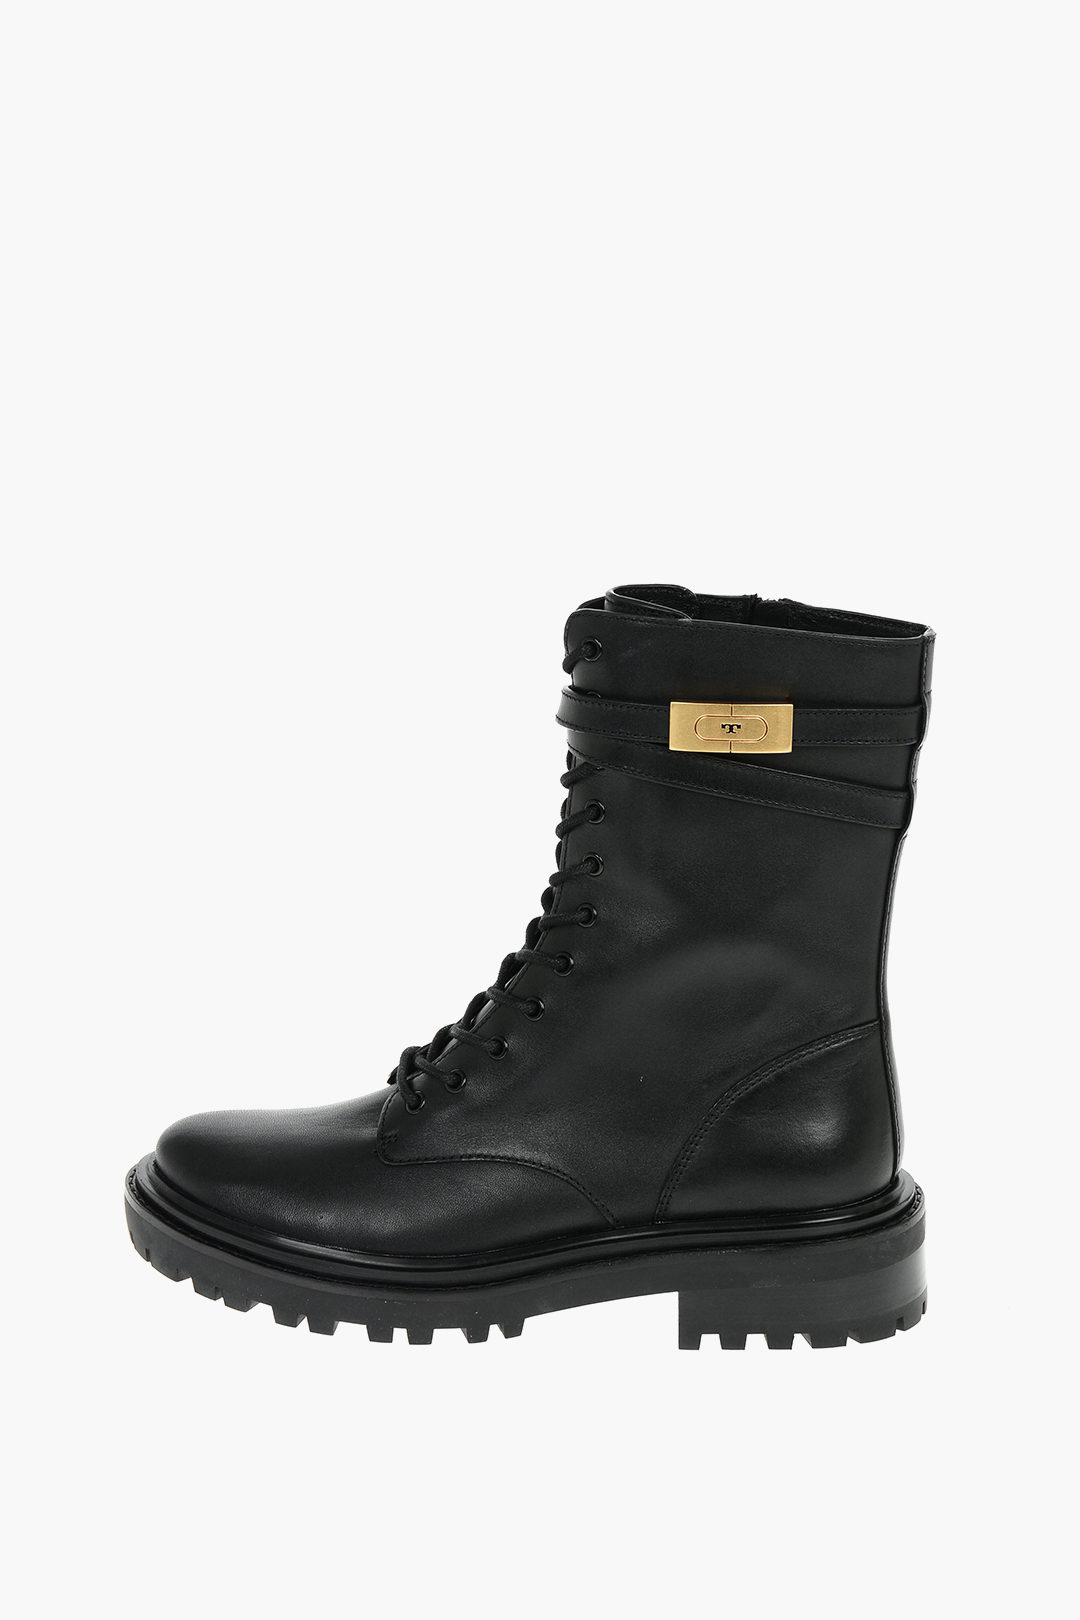 Tory Burch Leather Lace-up Combat Boots with Golden Logoed Hardware 4,5cm  women - Glamood Outlet